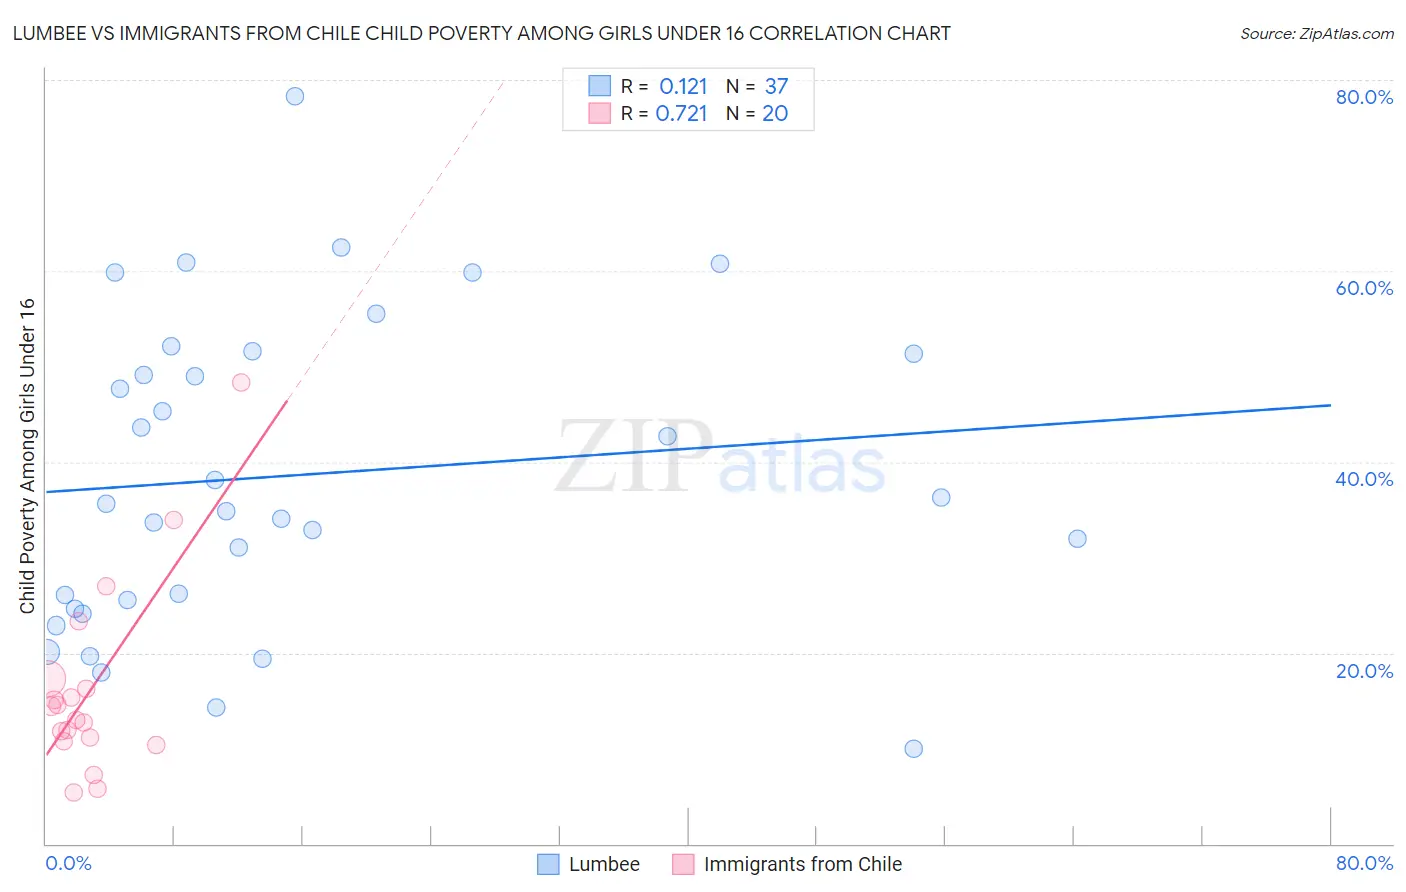 Lumbee vs Immigrants from Chile Child Poverty Among Girls Under 16